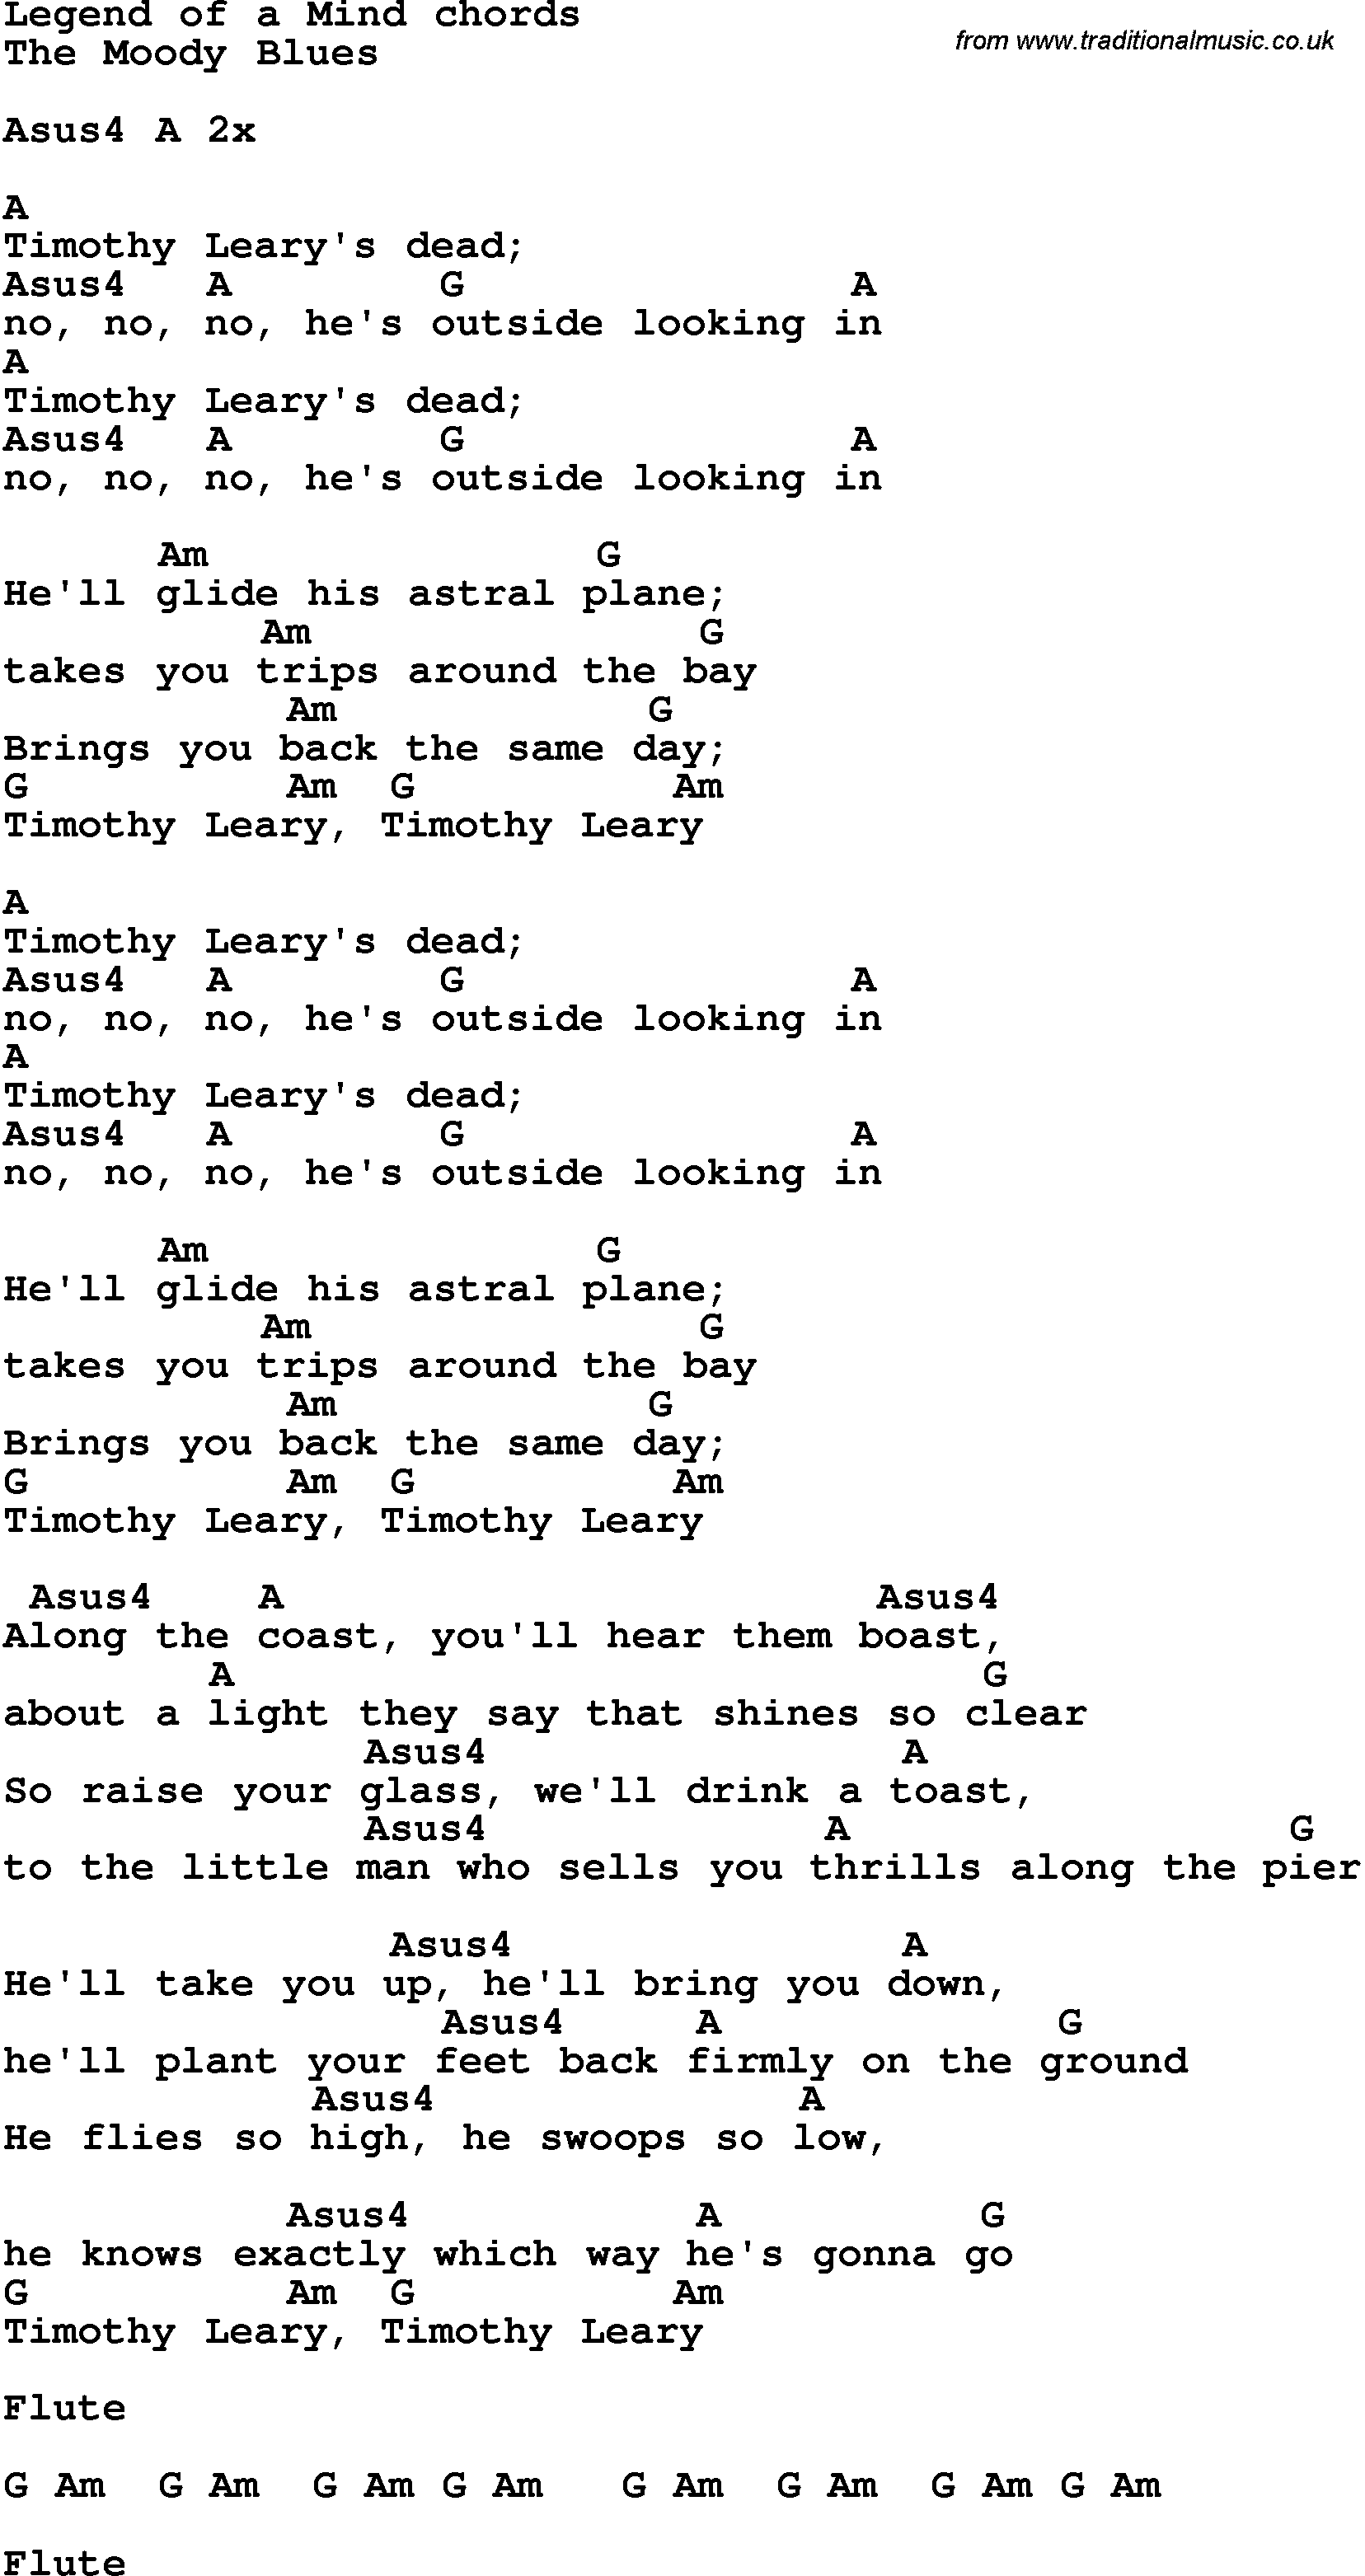 Song Lyrics with guitar chords for Legend Of A Mind